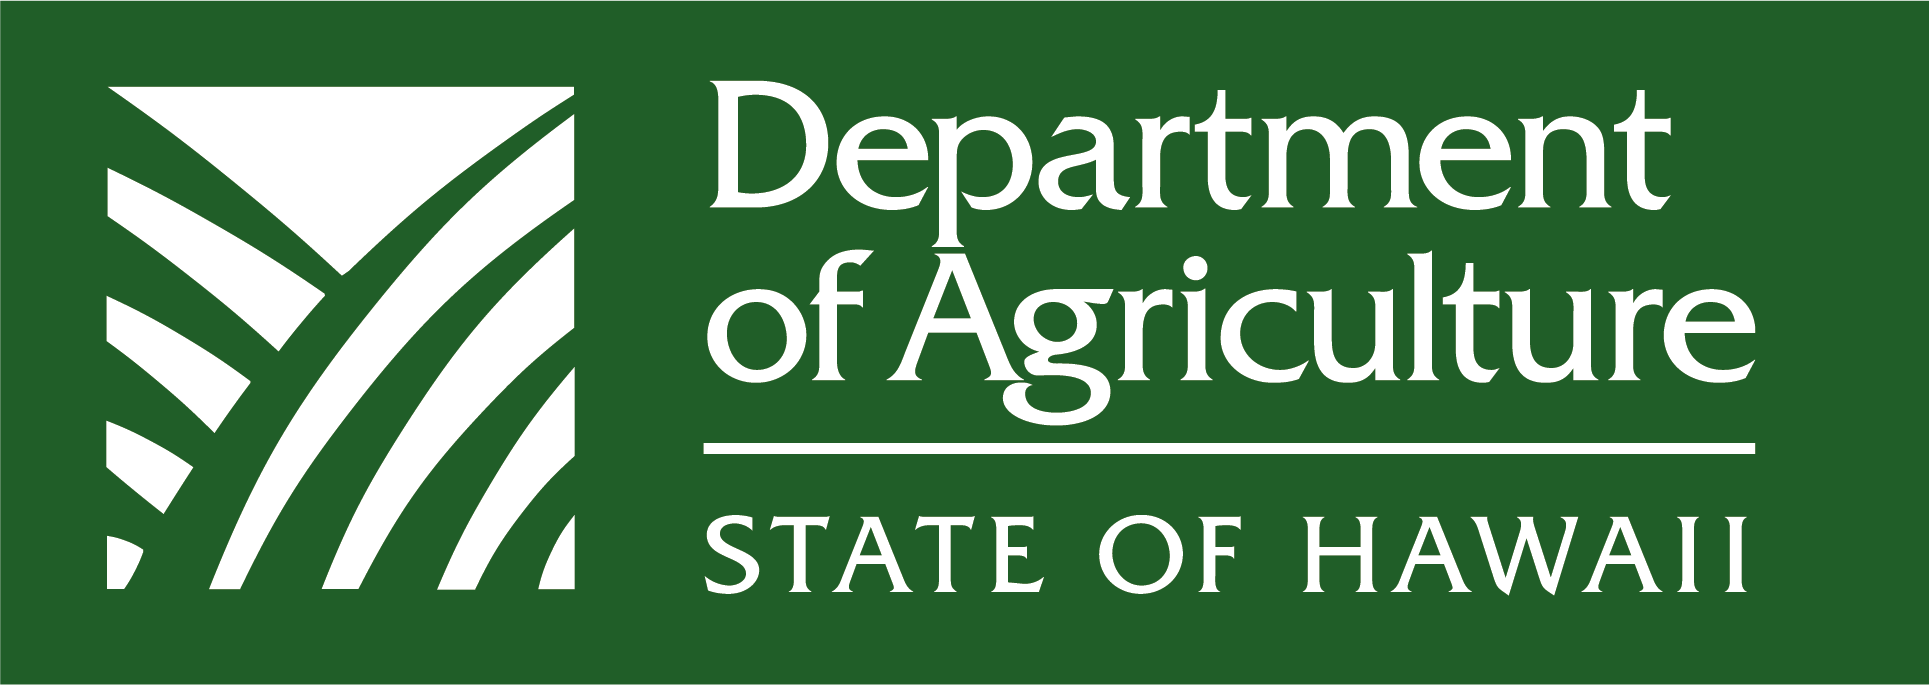 Hawaii Department of Agriculture Logo